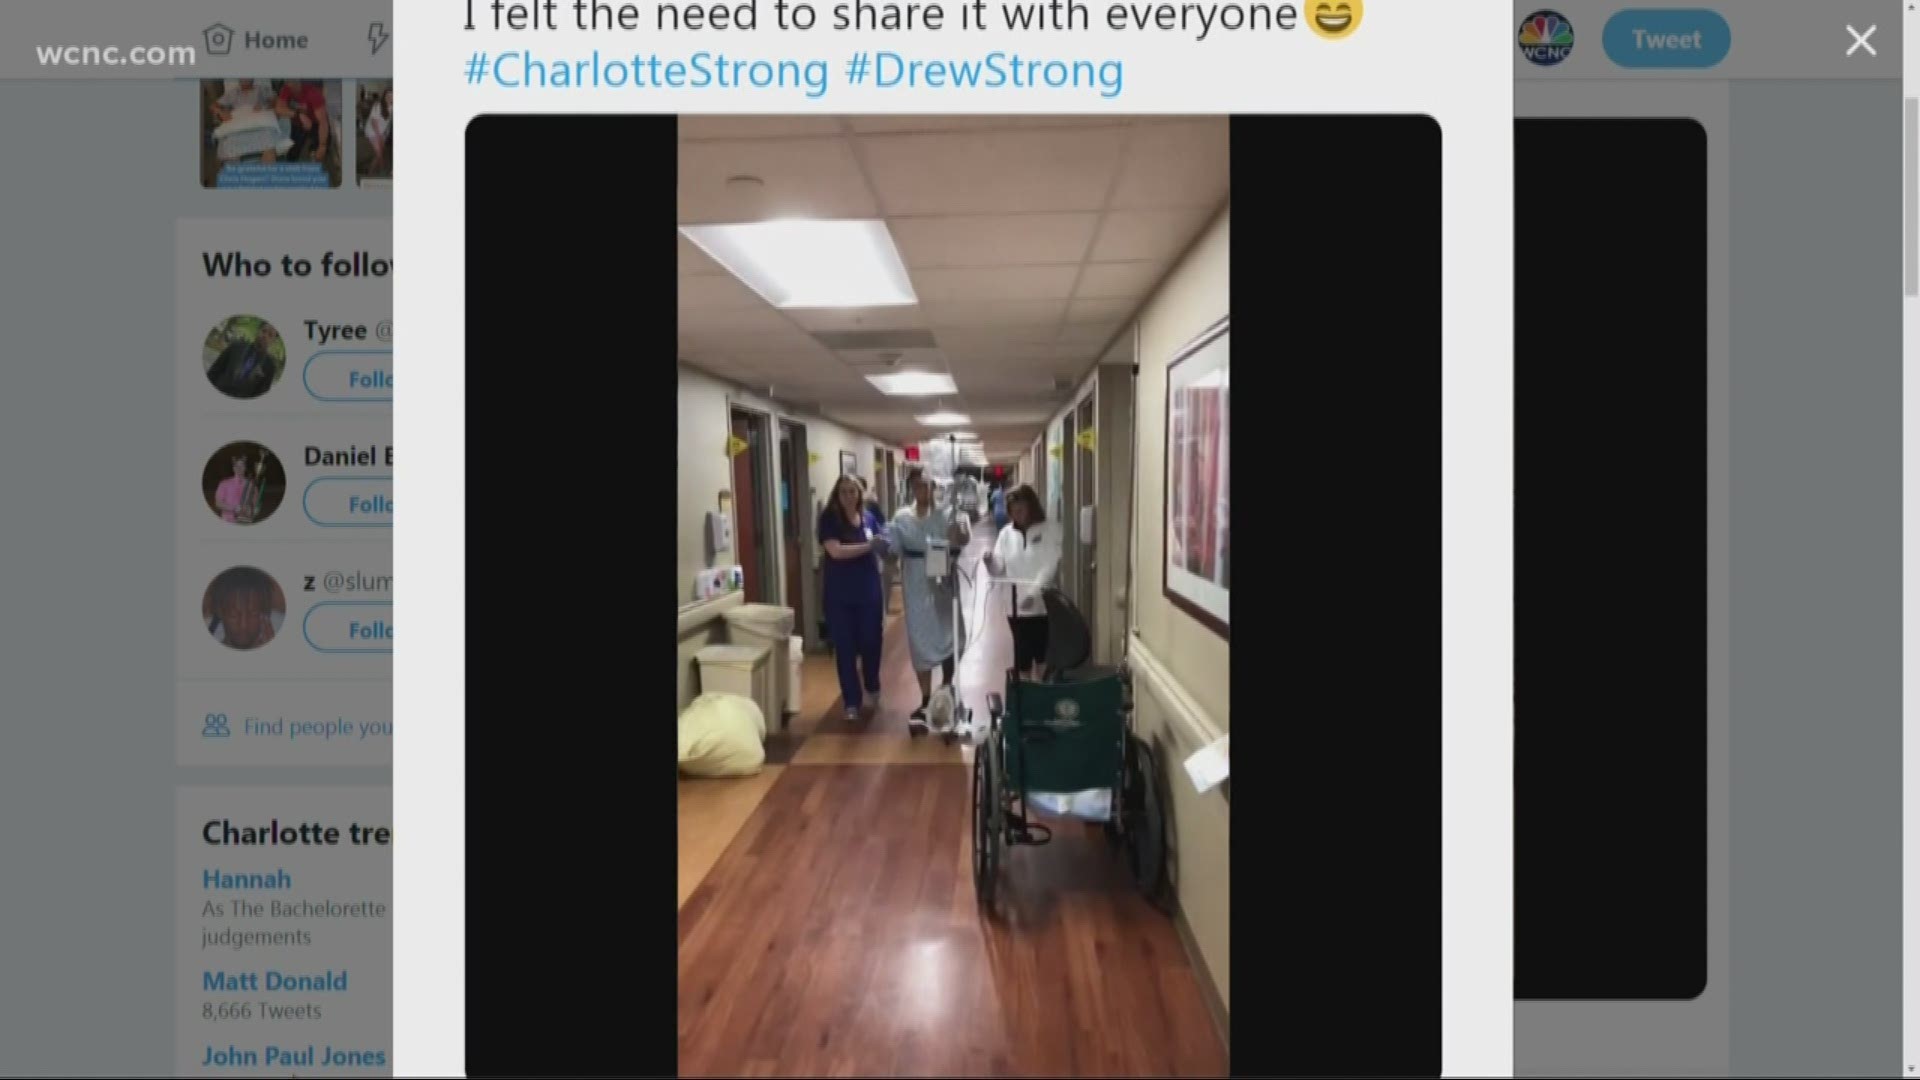 UNC Charlotte shooting survivor Drew Pescaro took his first steps nearly two weeks after he was shot on the final day of class.